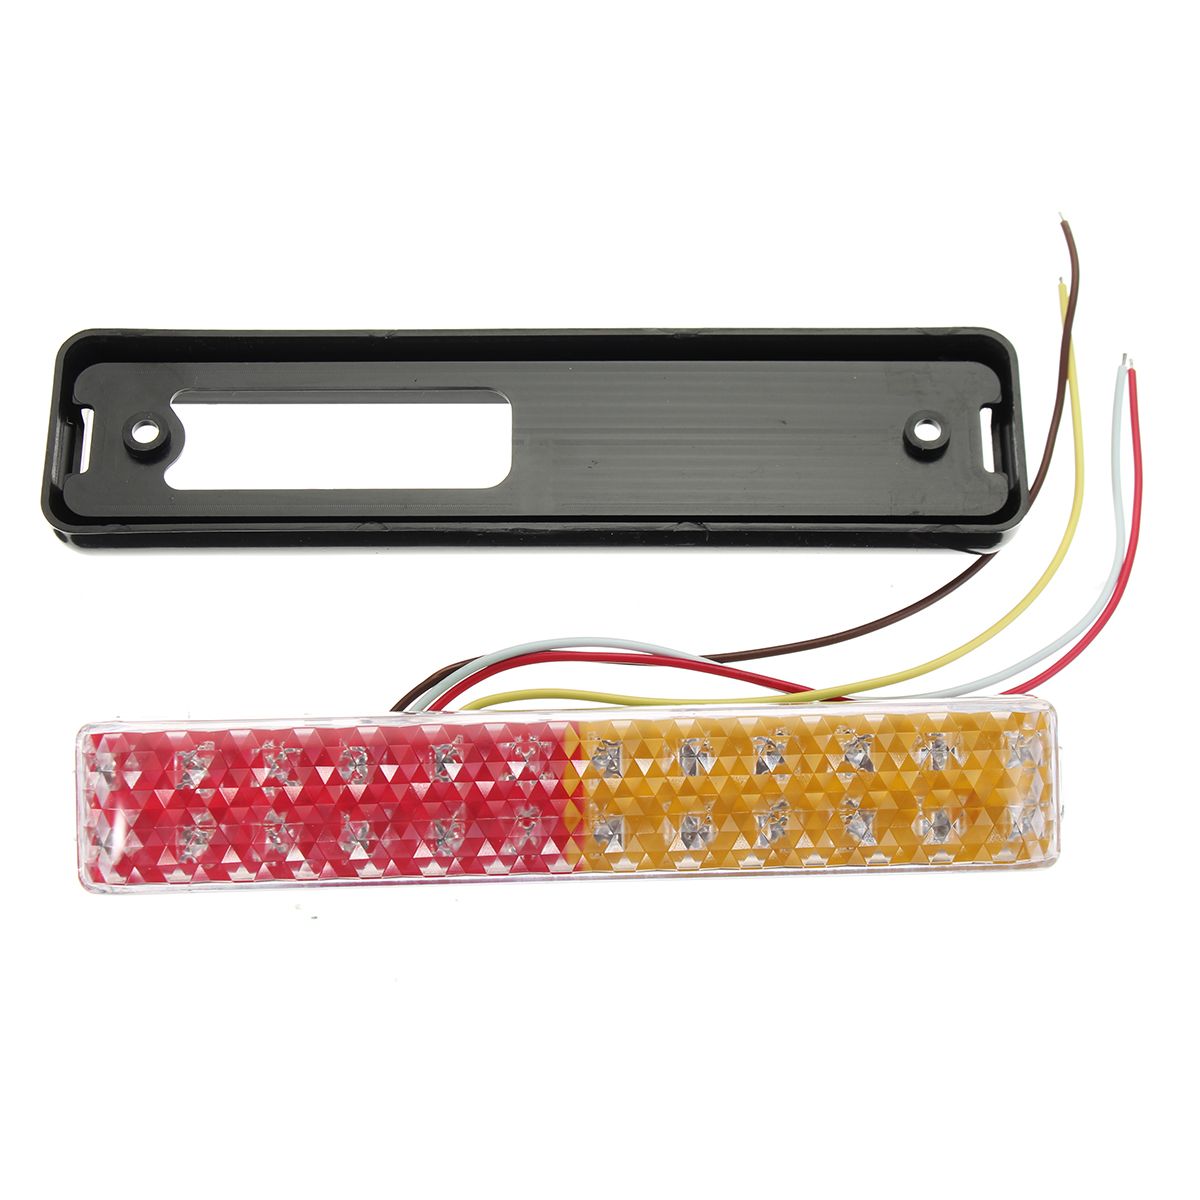 10-30V-24LED-Rear-Tail-Lights-Clear-Slimline-Lamp-Waterproof-RedYellow-For-Truck-Trailer-Lorry-1616972